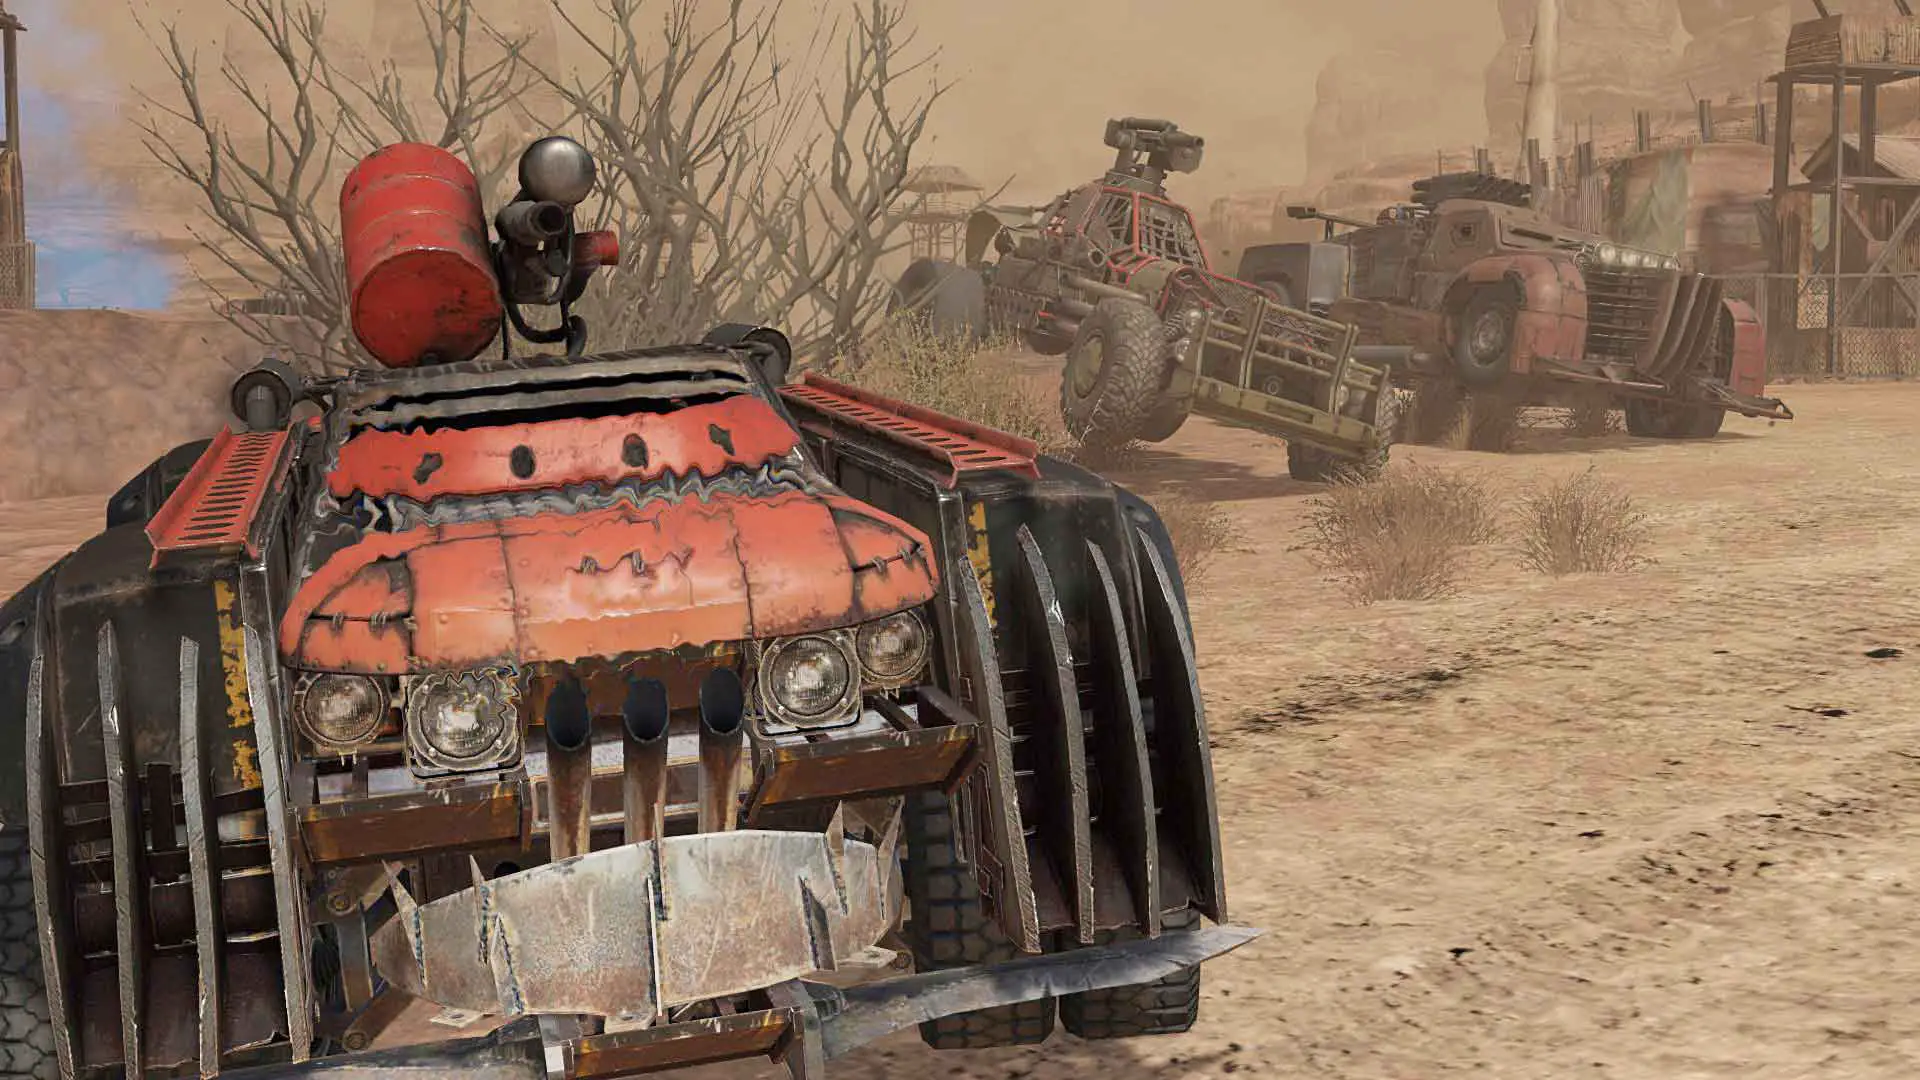 download free crossout twitter